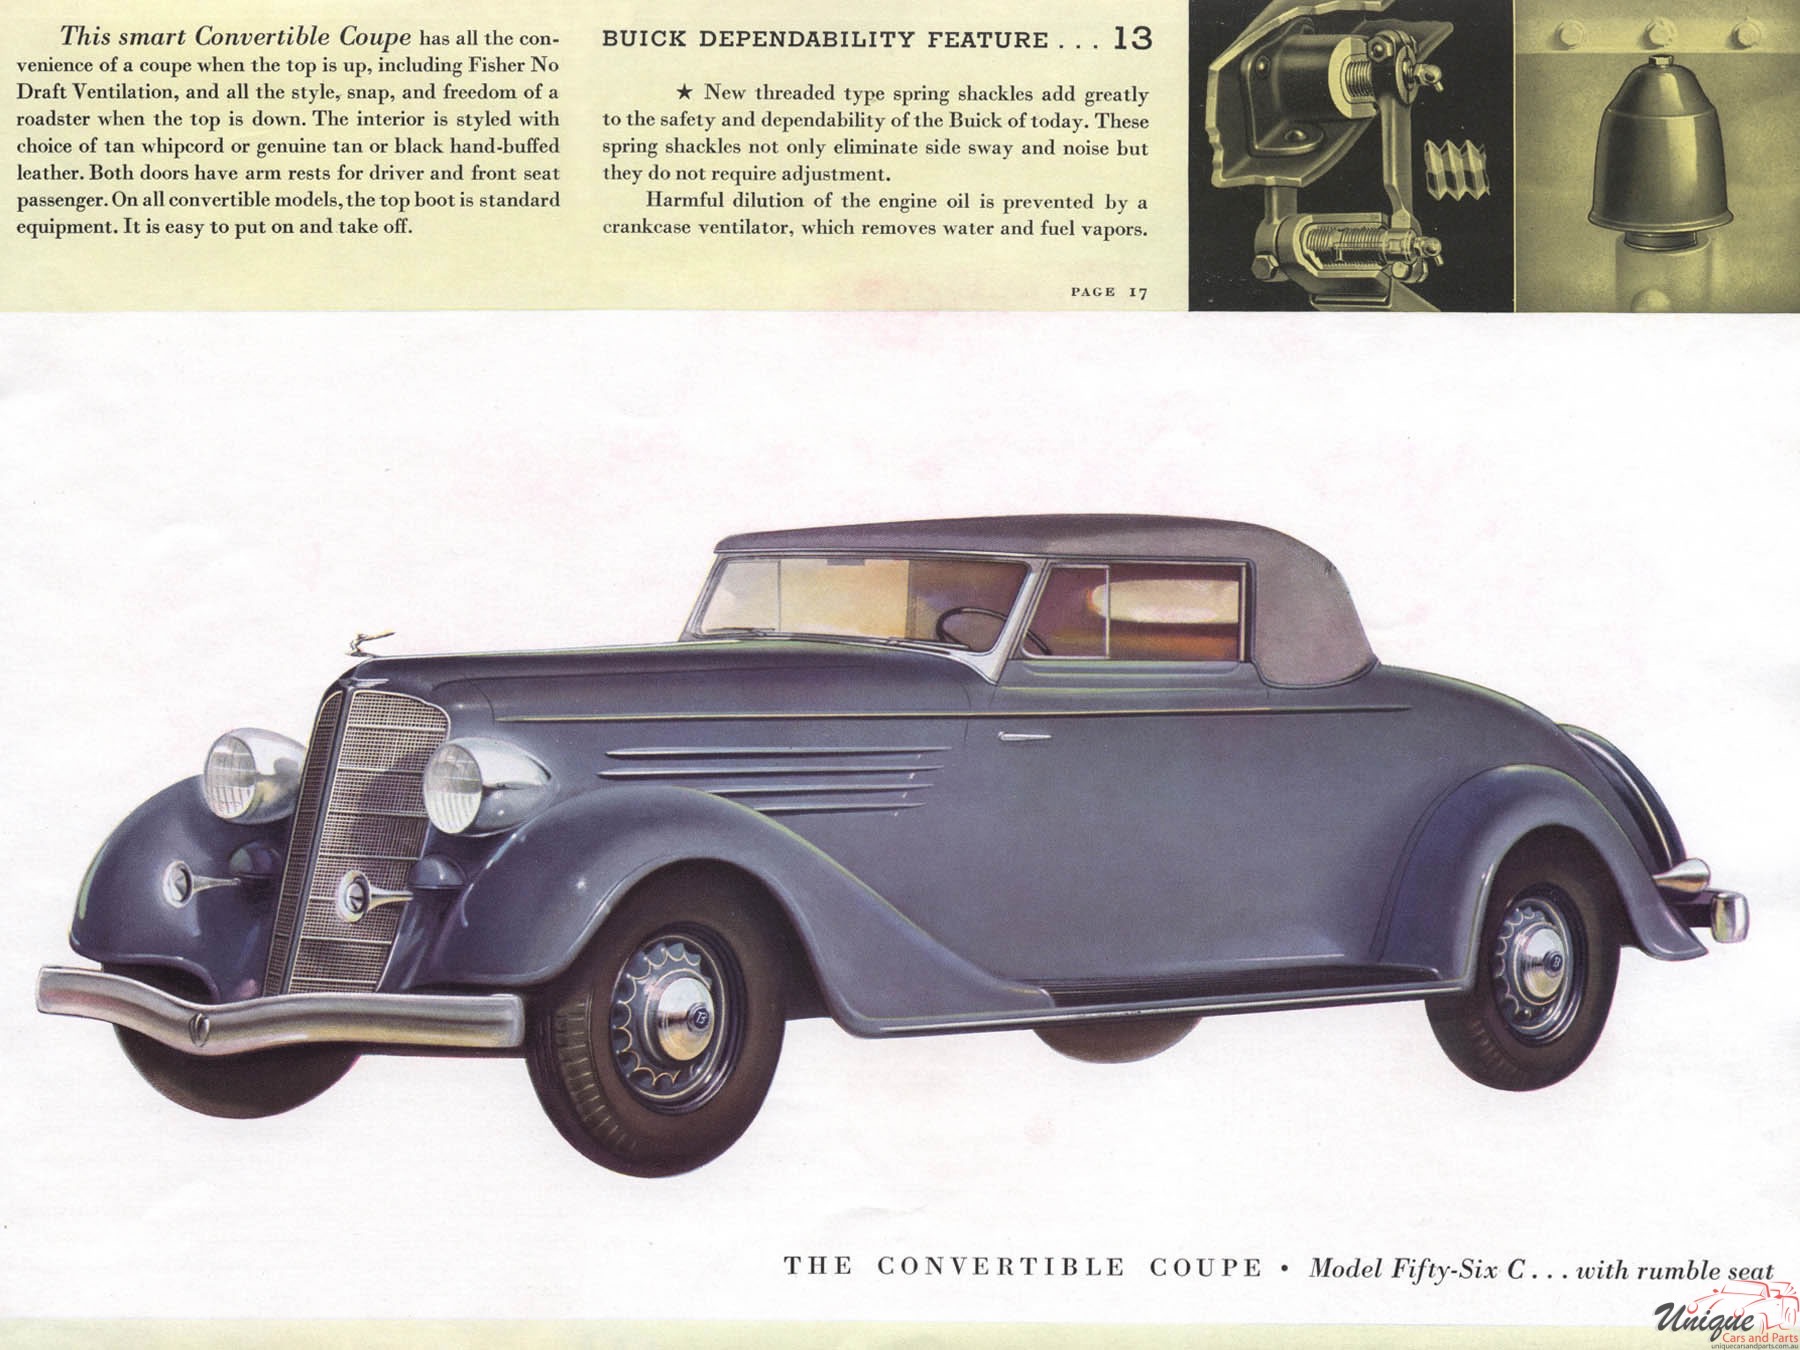 1935 Buick Brochure Page 13